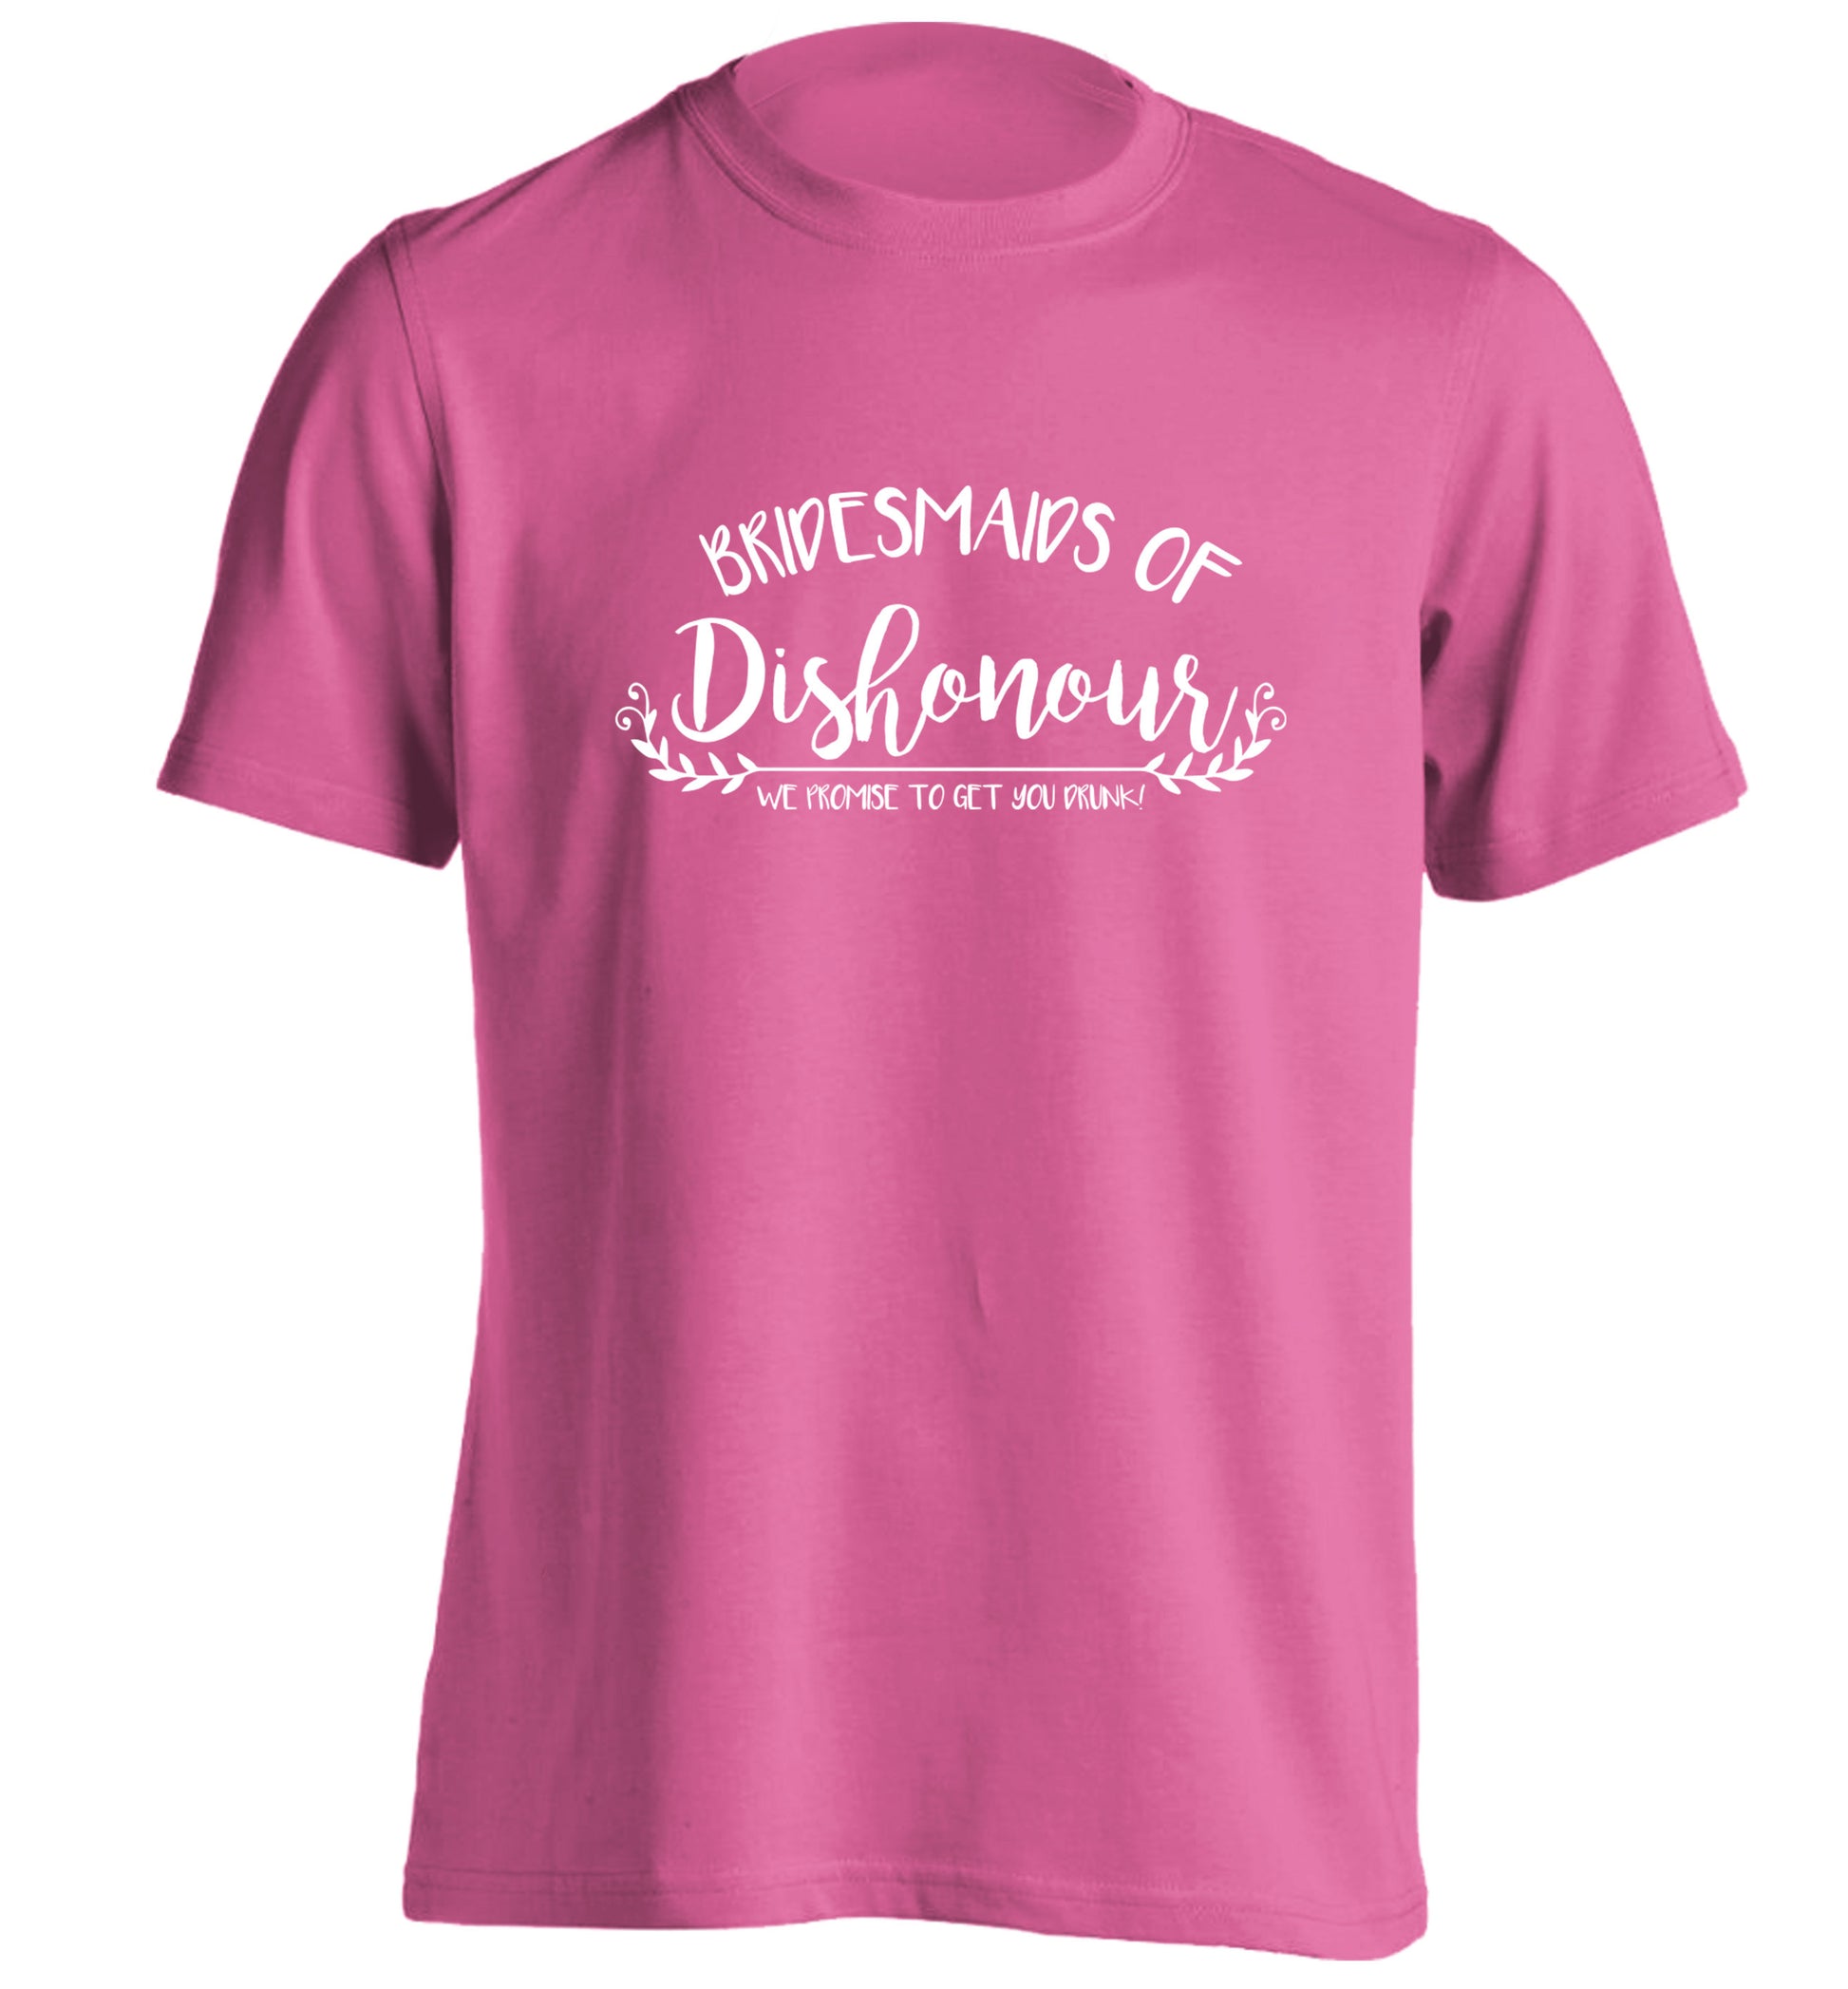 Bridesmaids of Dishonour we promise to get you drunk! adults unisex pink Tshirt 2XL